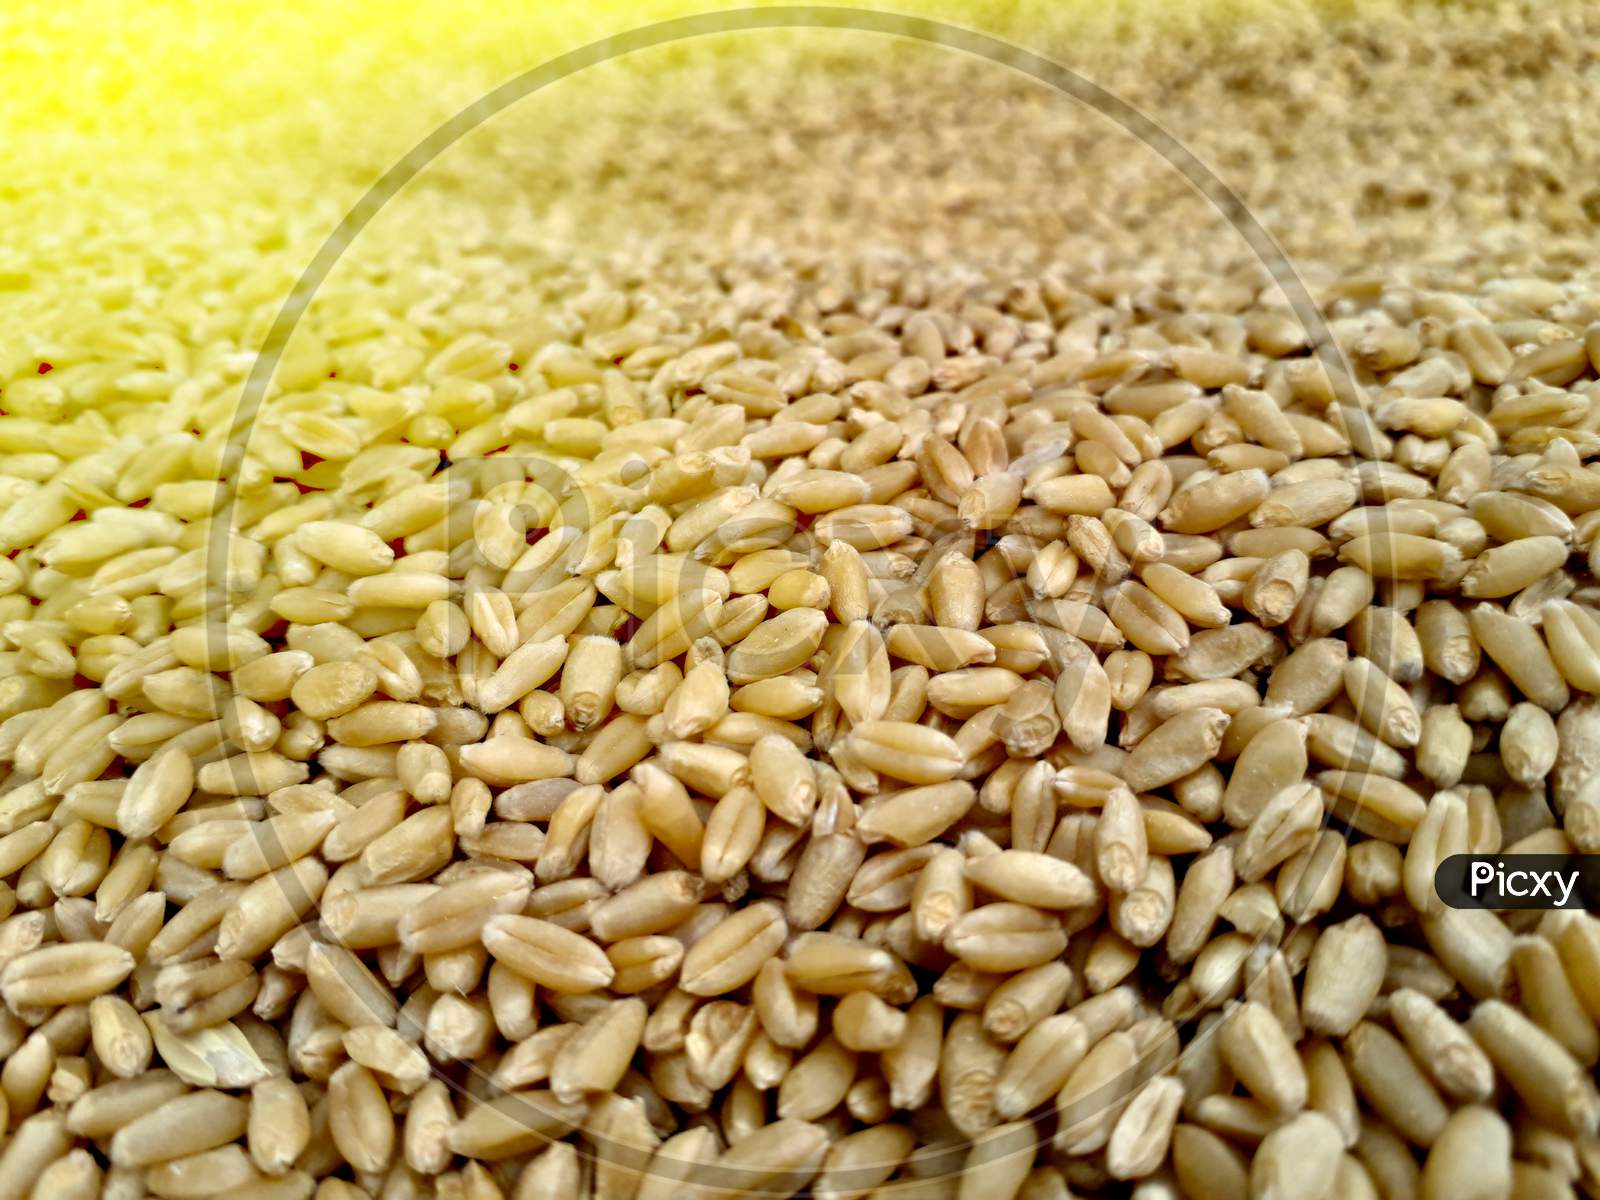 A Pile Or Heap Of Wheat Seeds Put In Sunlight To Be Dry